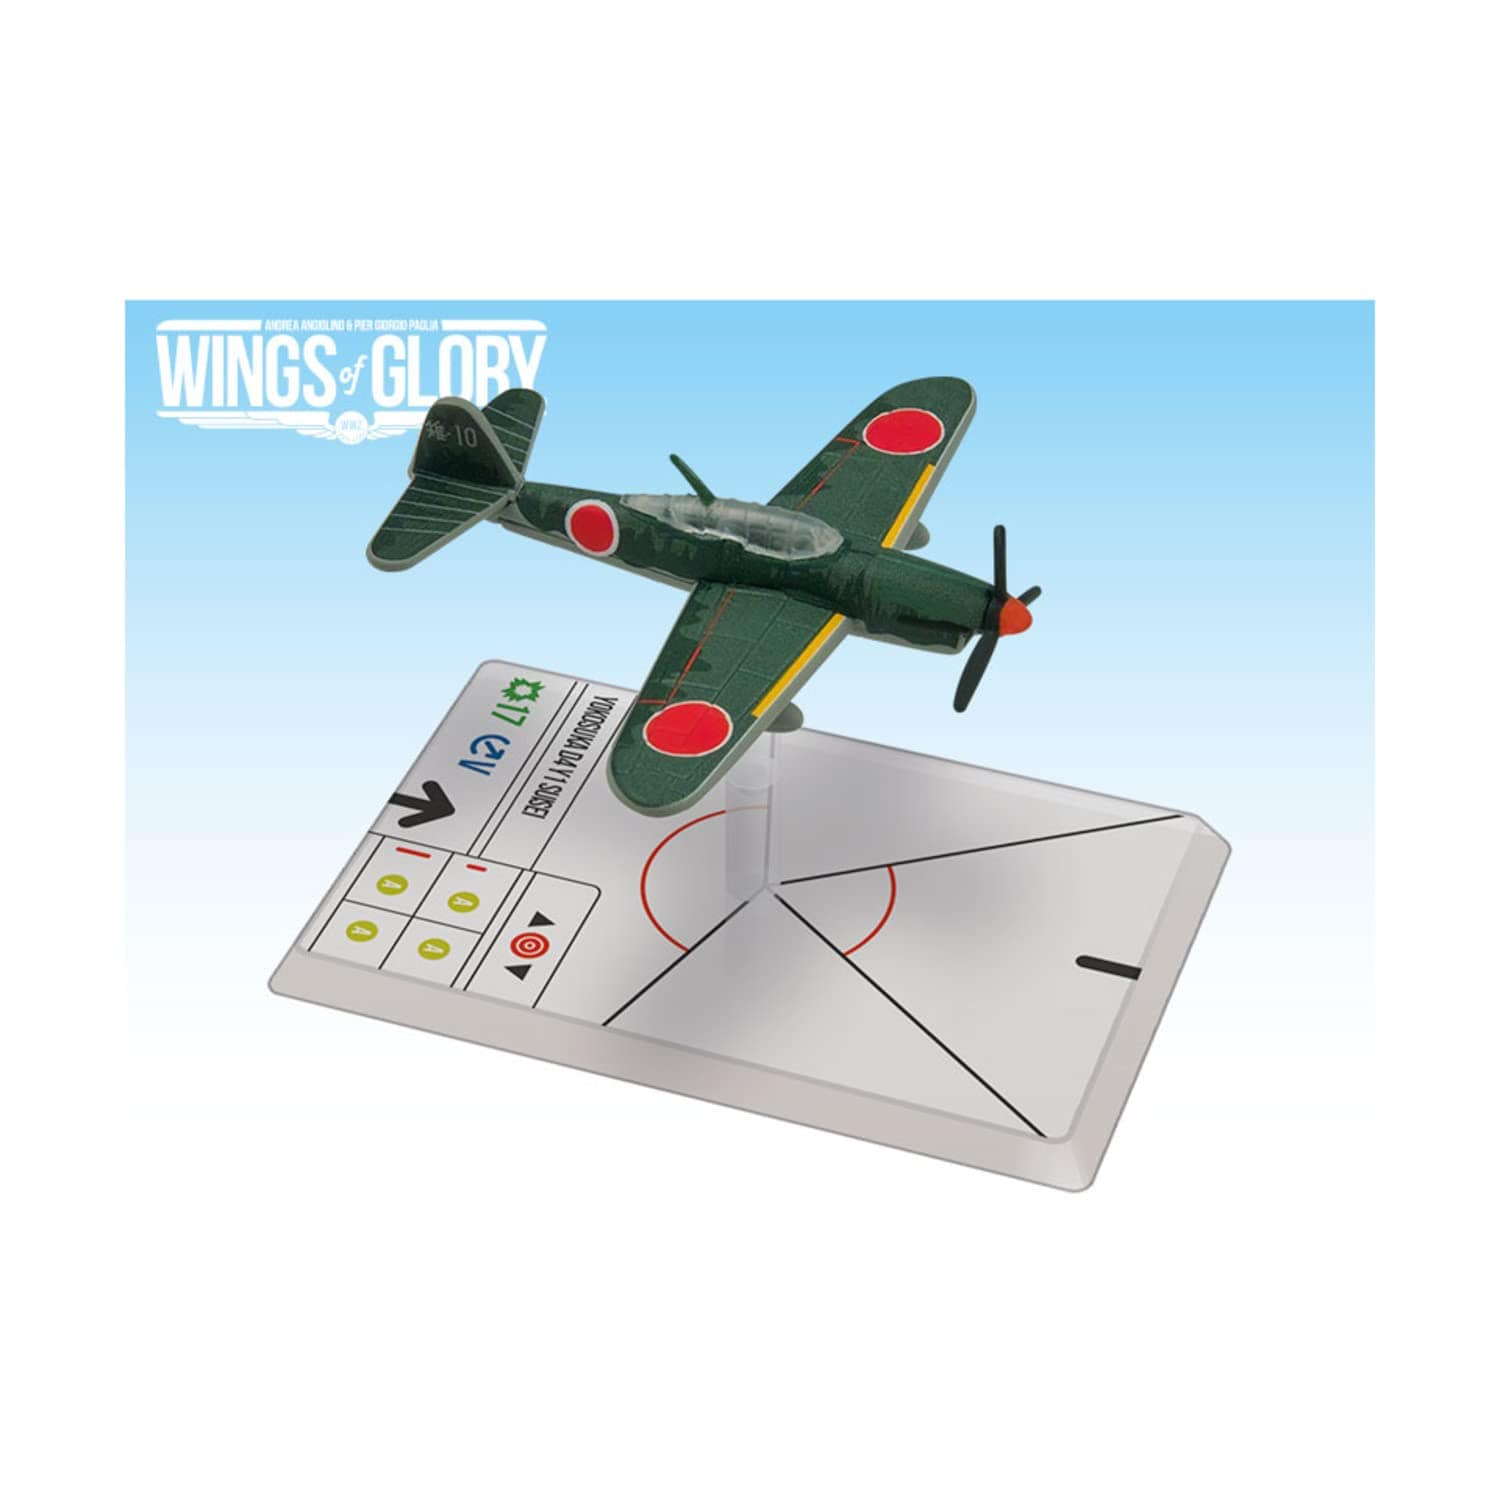 Ares Games Wings of Glory: Yokosuka D4Y1 (Kokutai 121) - Lost City Toys